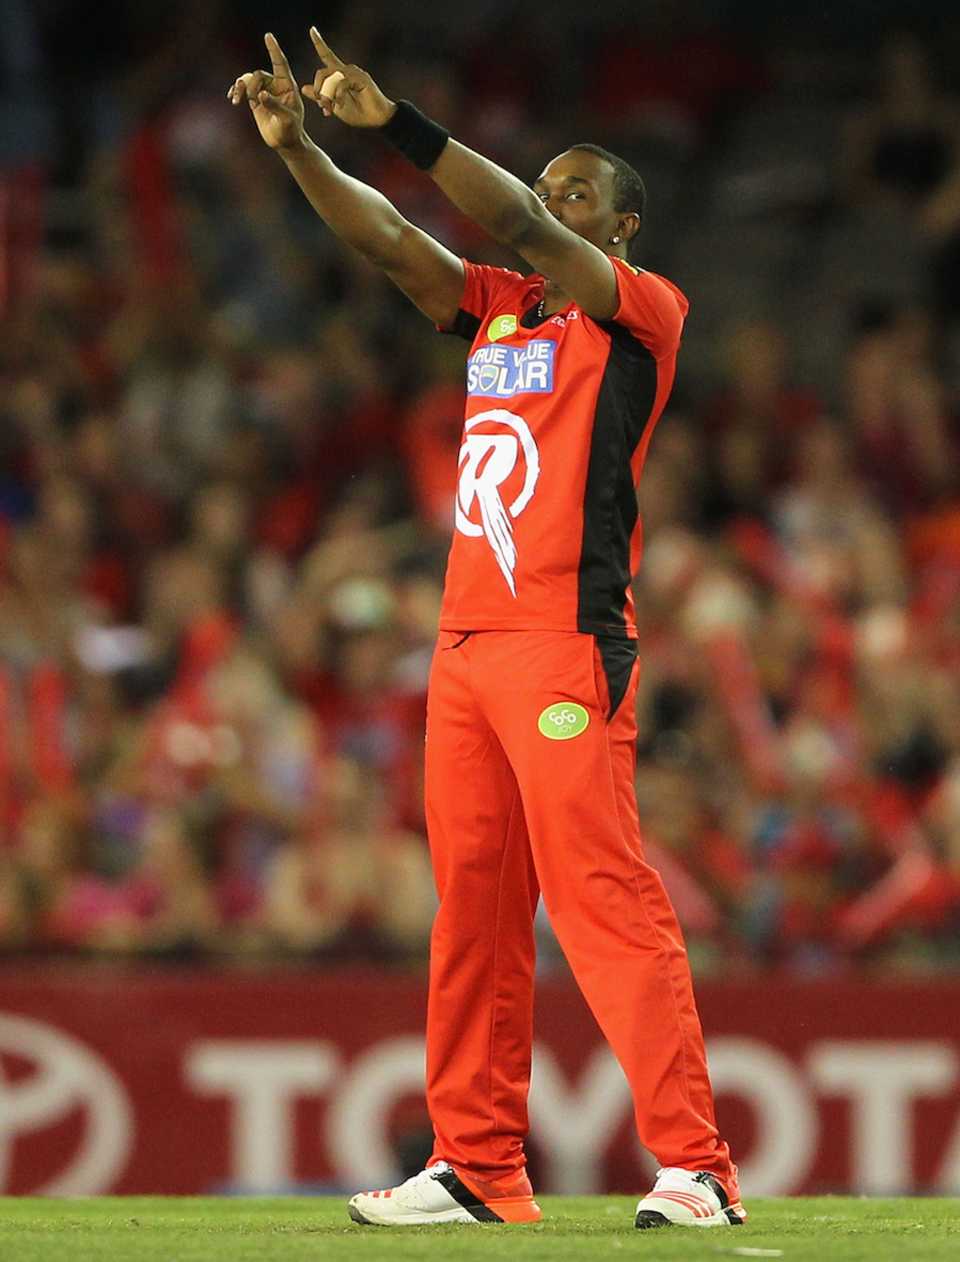 Dwayne Bravo does not hold his emotions back